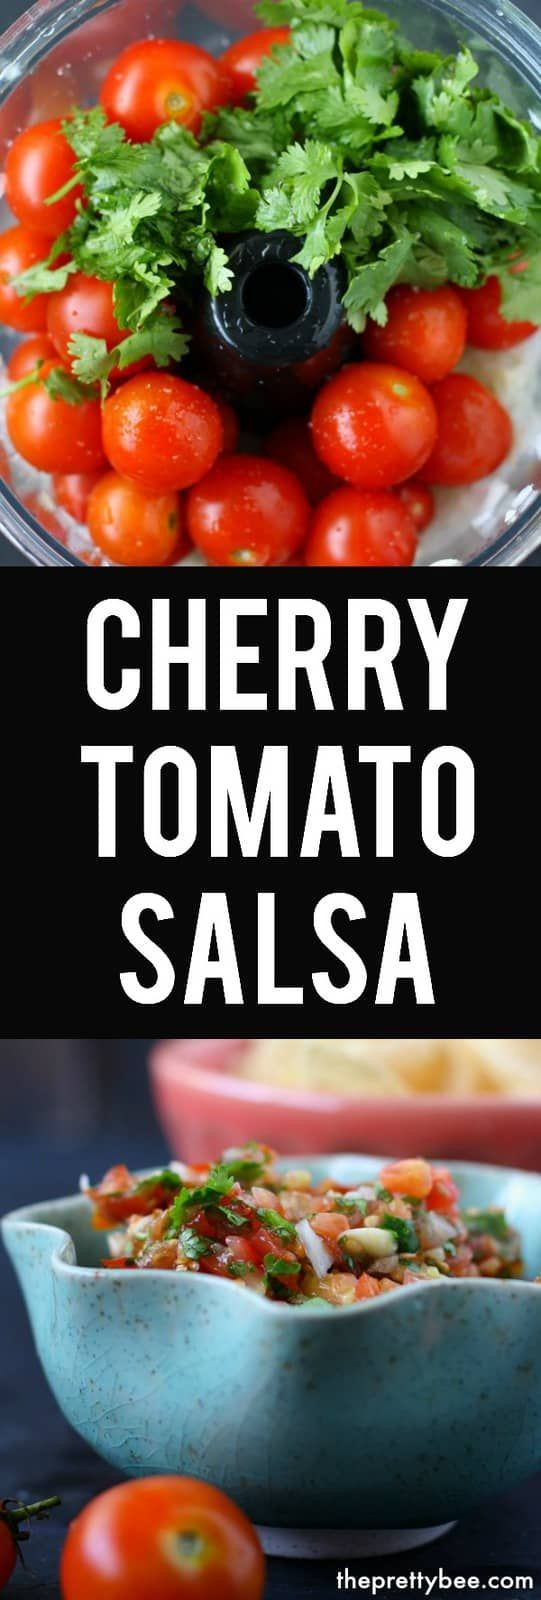 Canning Cherry Tomatoes Recipes
 Simple Cherry Tomato Salsa Recipe